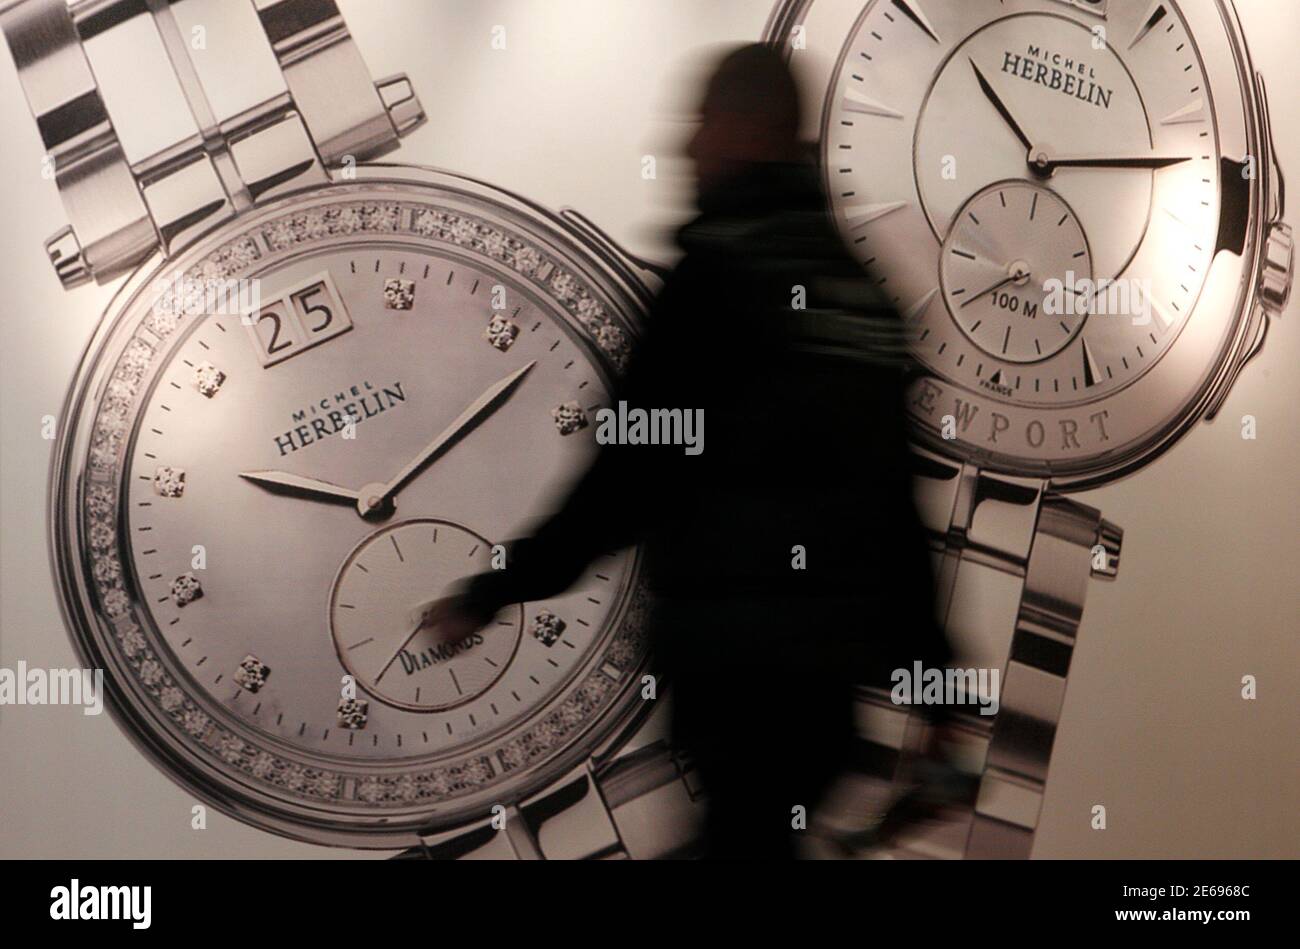 A visitor makes his way past Michel Herbelin showcase at Baselworld fair in  Basel, March 7, 2012. The world's leading watch and jewellery show  Baselworld is to be held in Basel from